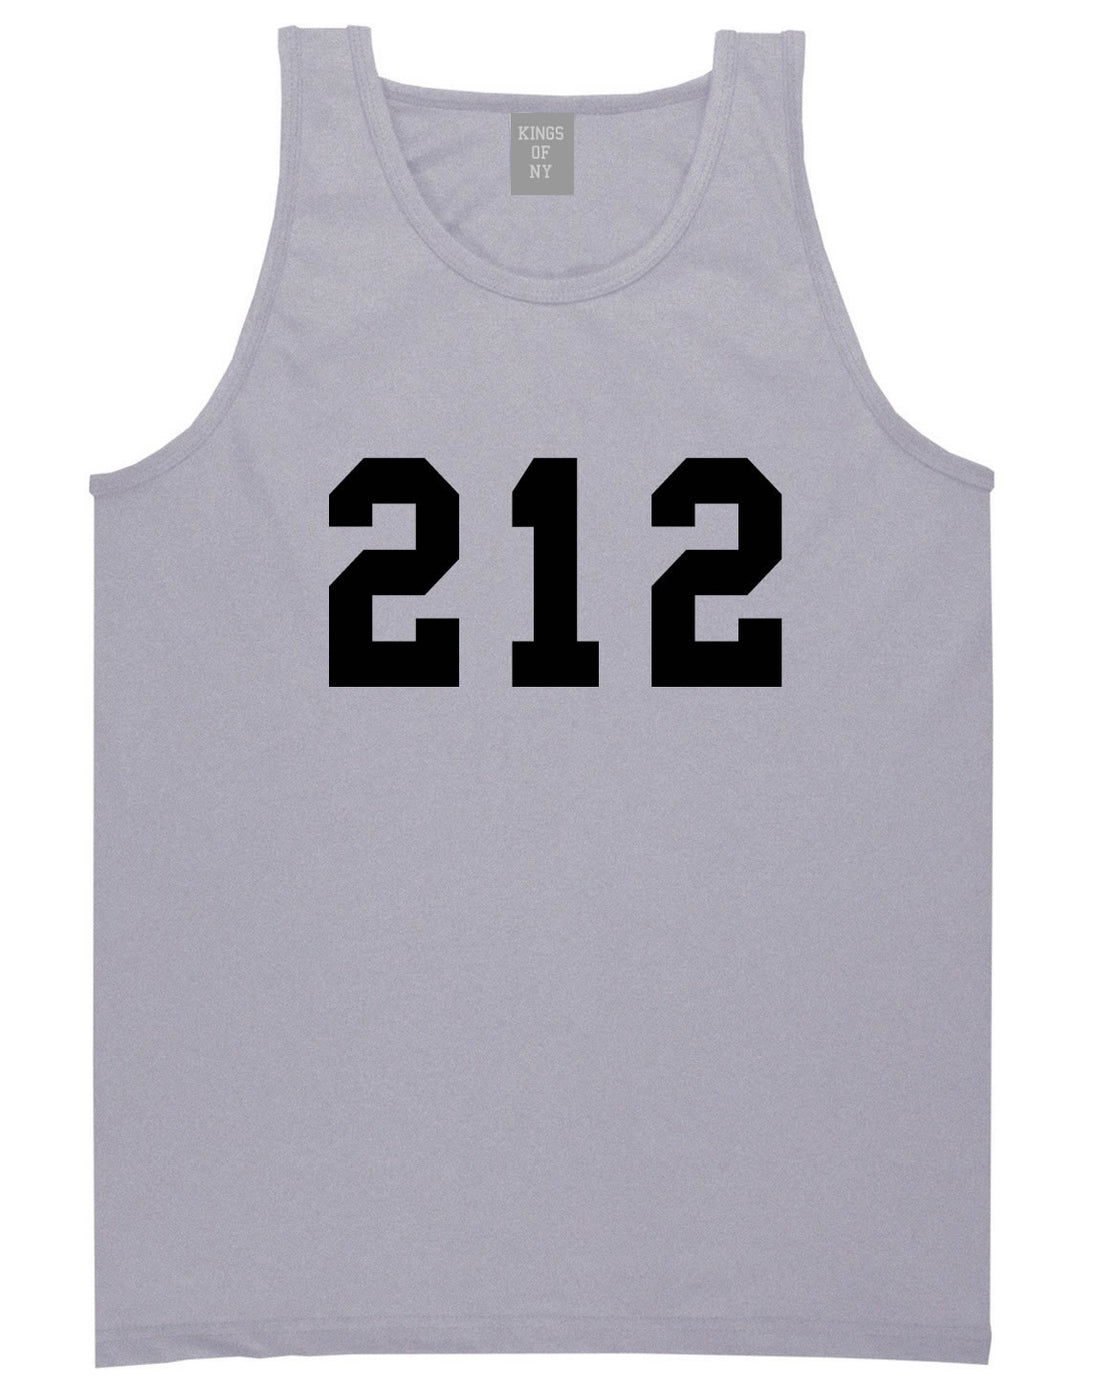 212 New York Area Code Tank Top in Grey By Kings Of NY